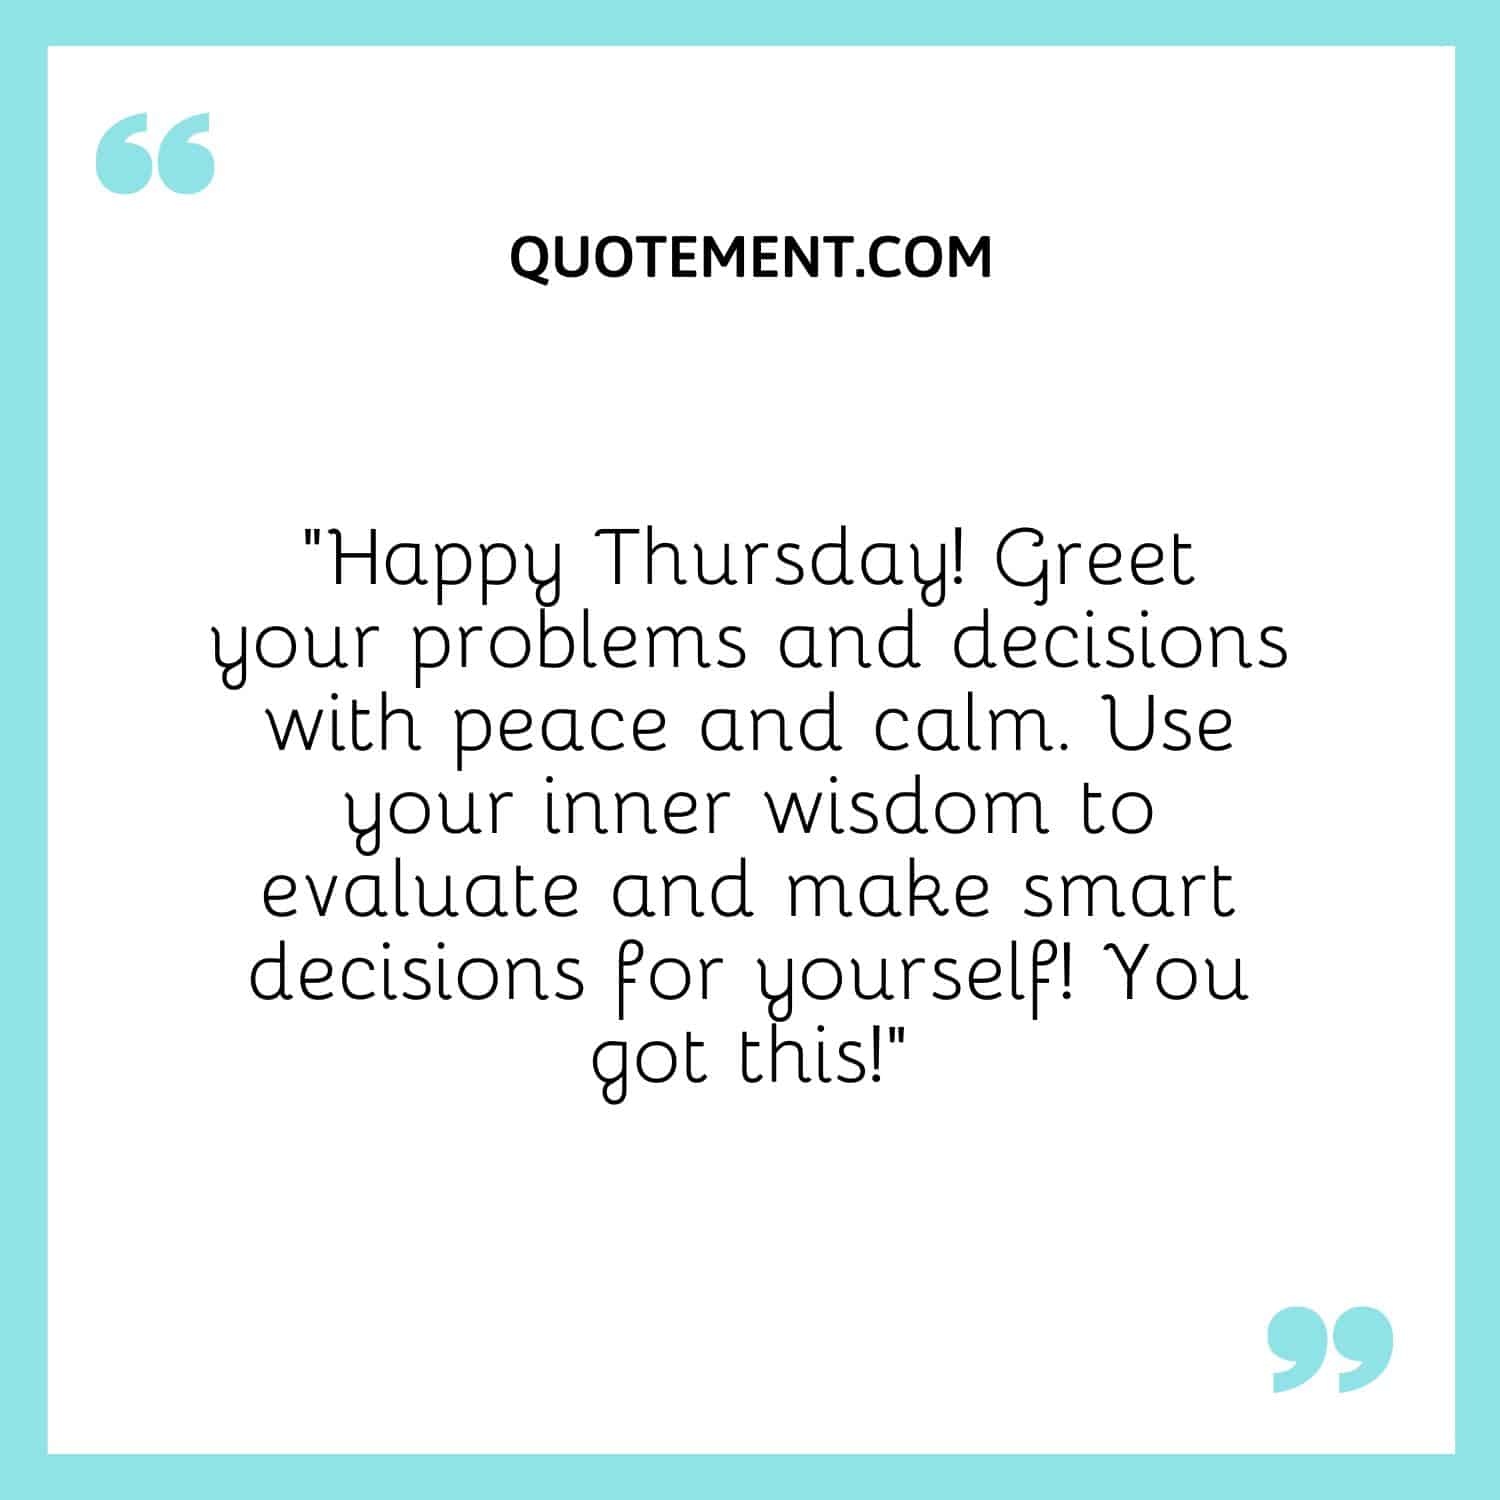 “Happy Thursday! Greet your problems and decisions with peace and calm. Use your inner wisdom to evaluate and make smart decisions for yourself! You got this!”